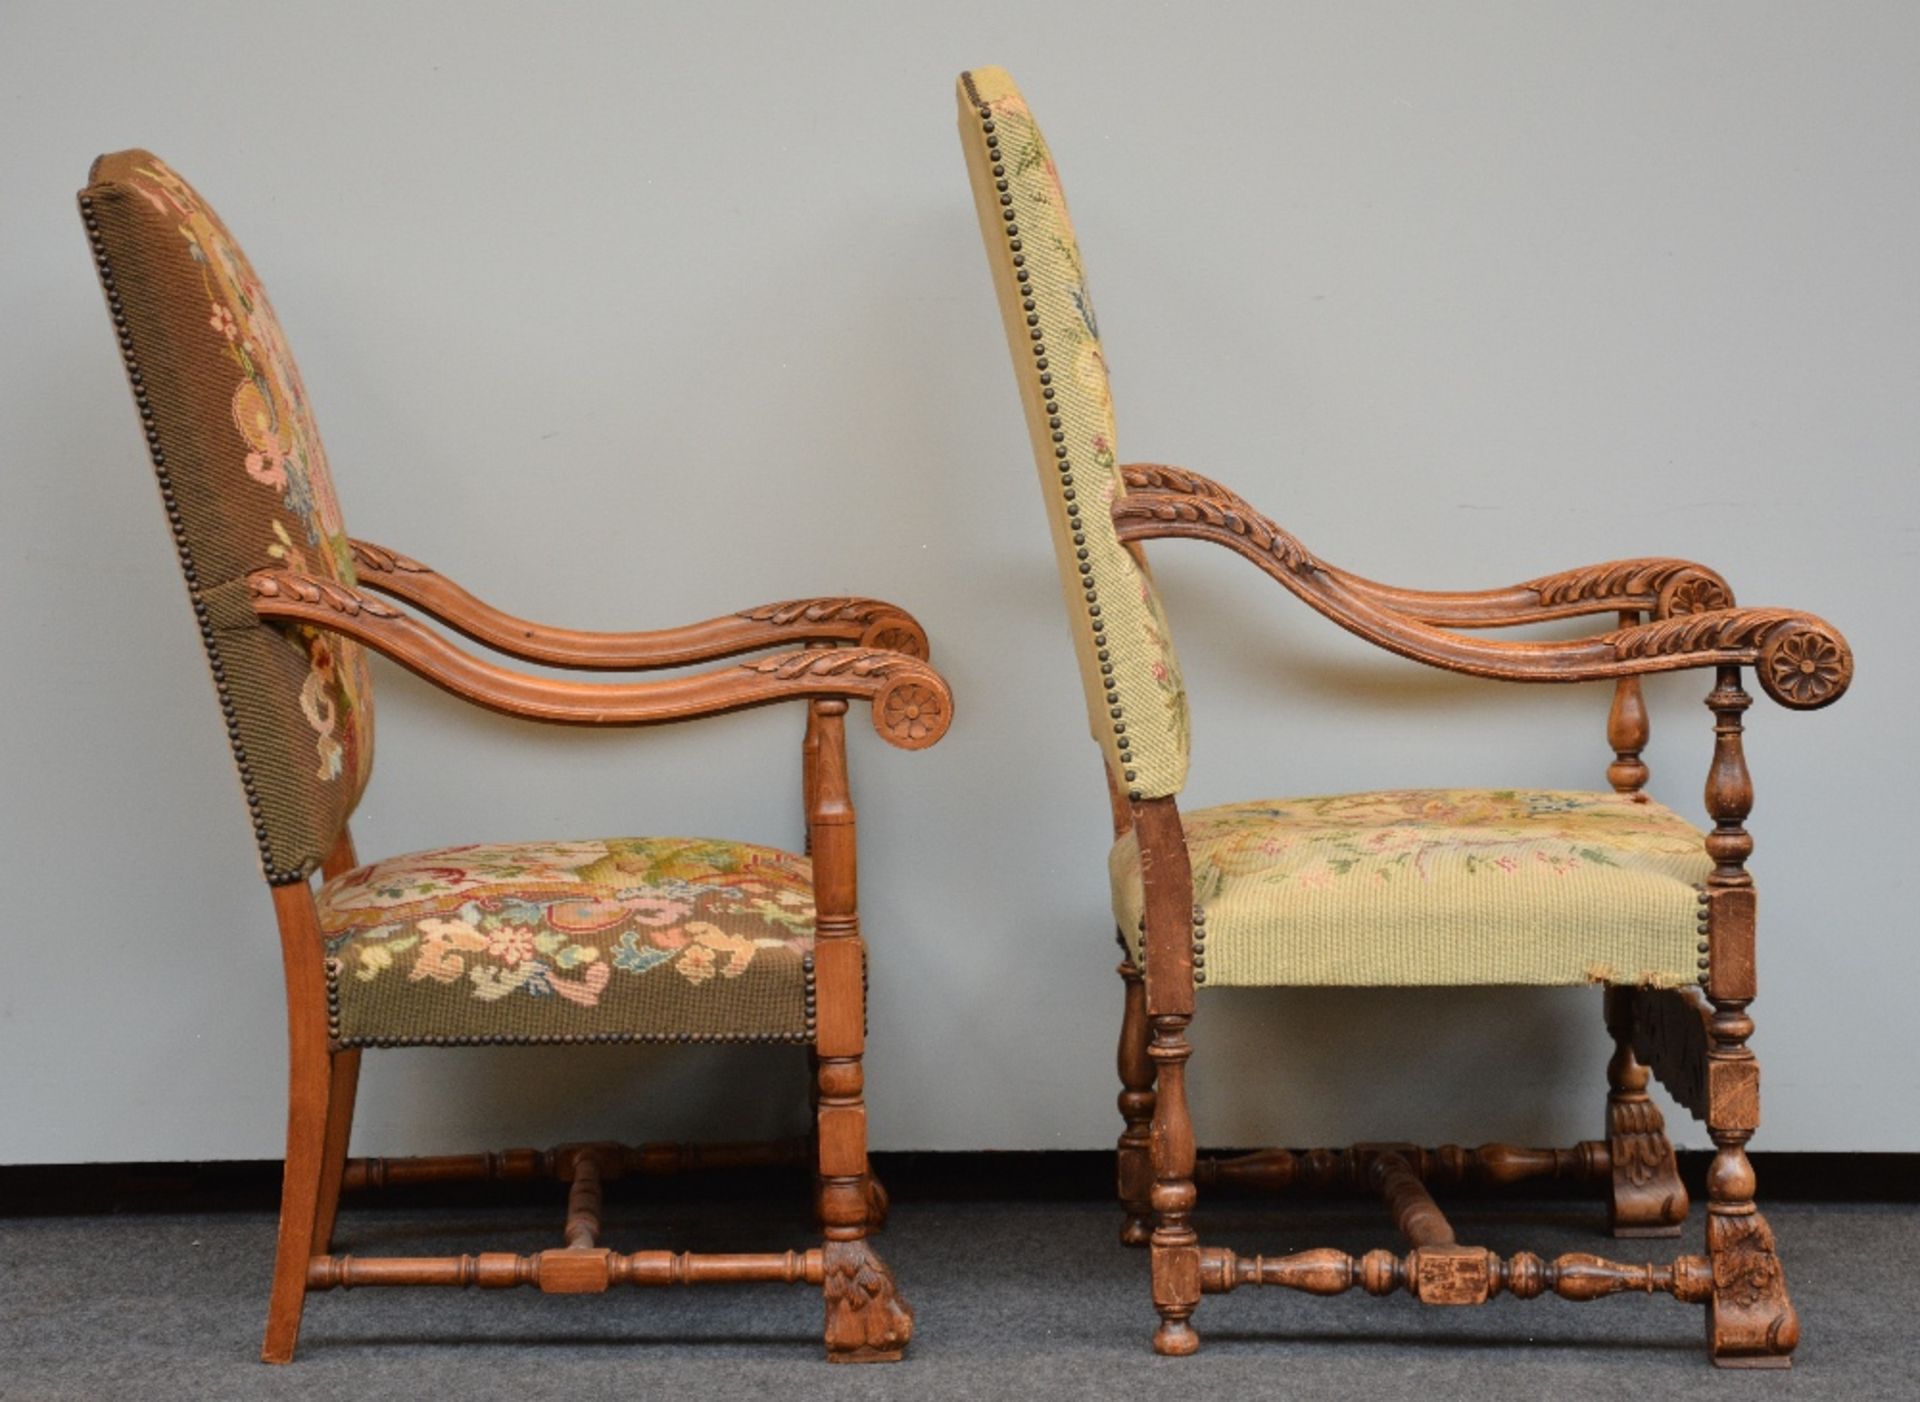 Two richly carved LXV-style armchairs with 'gros point' upholstery, H 111,5 / 119,5 - W 68 cm - Bild 4 aus 4